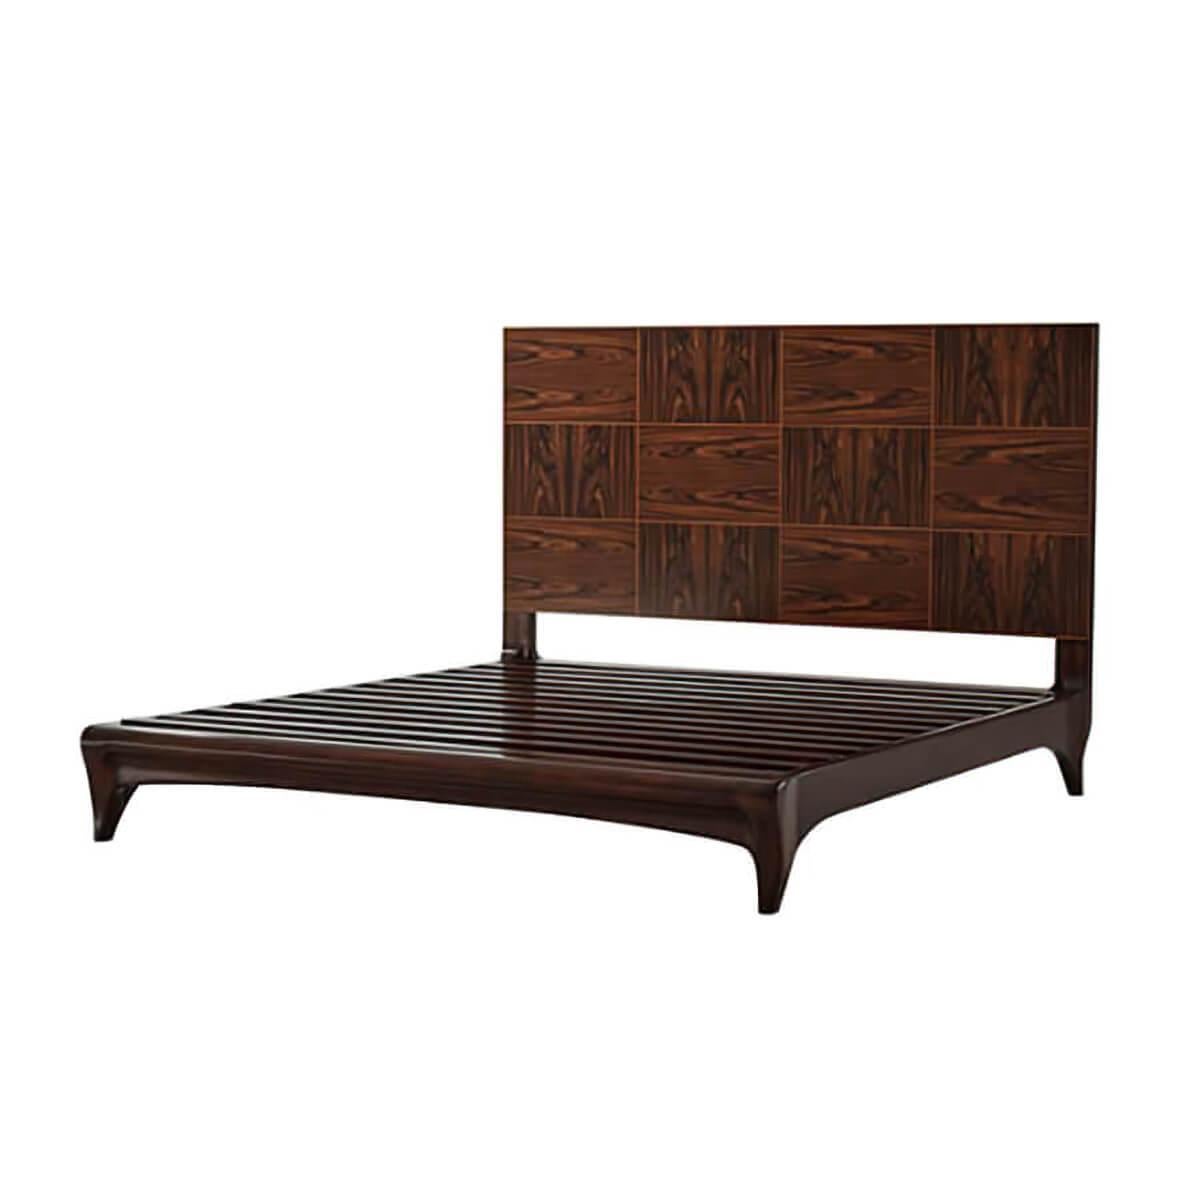 Mid-Century Modern style king size bed with exotic wild rosewood veneer and sapele oak. Includes platform bed slats.

Dimensions: 77.75